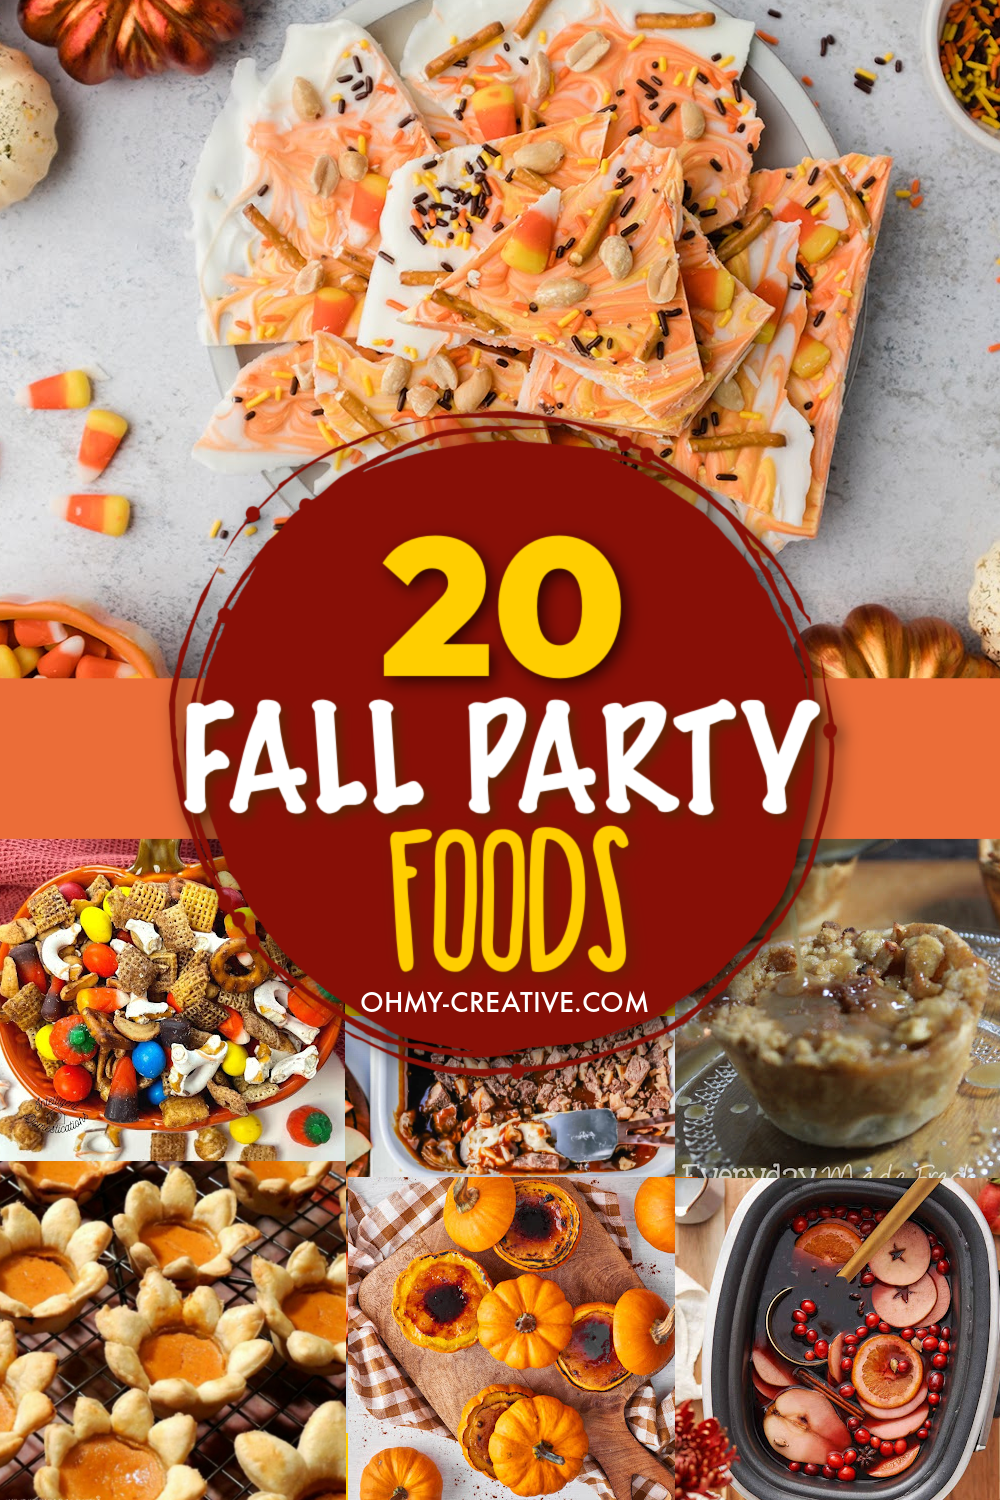 Fall Party Foods To Celebrate The Season